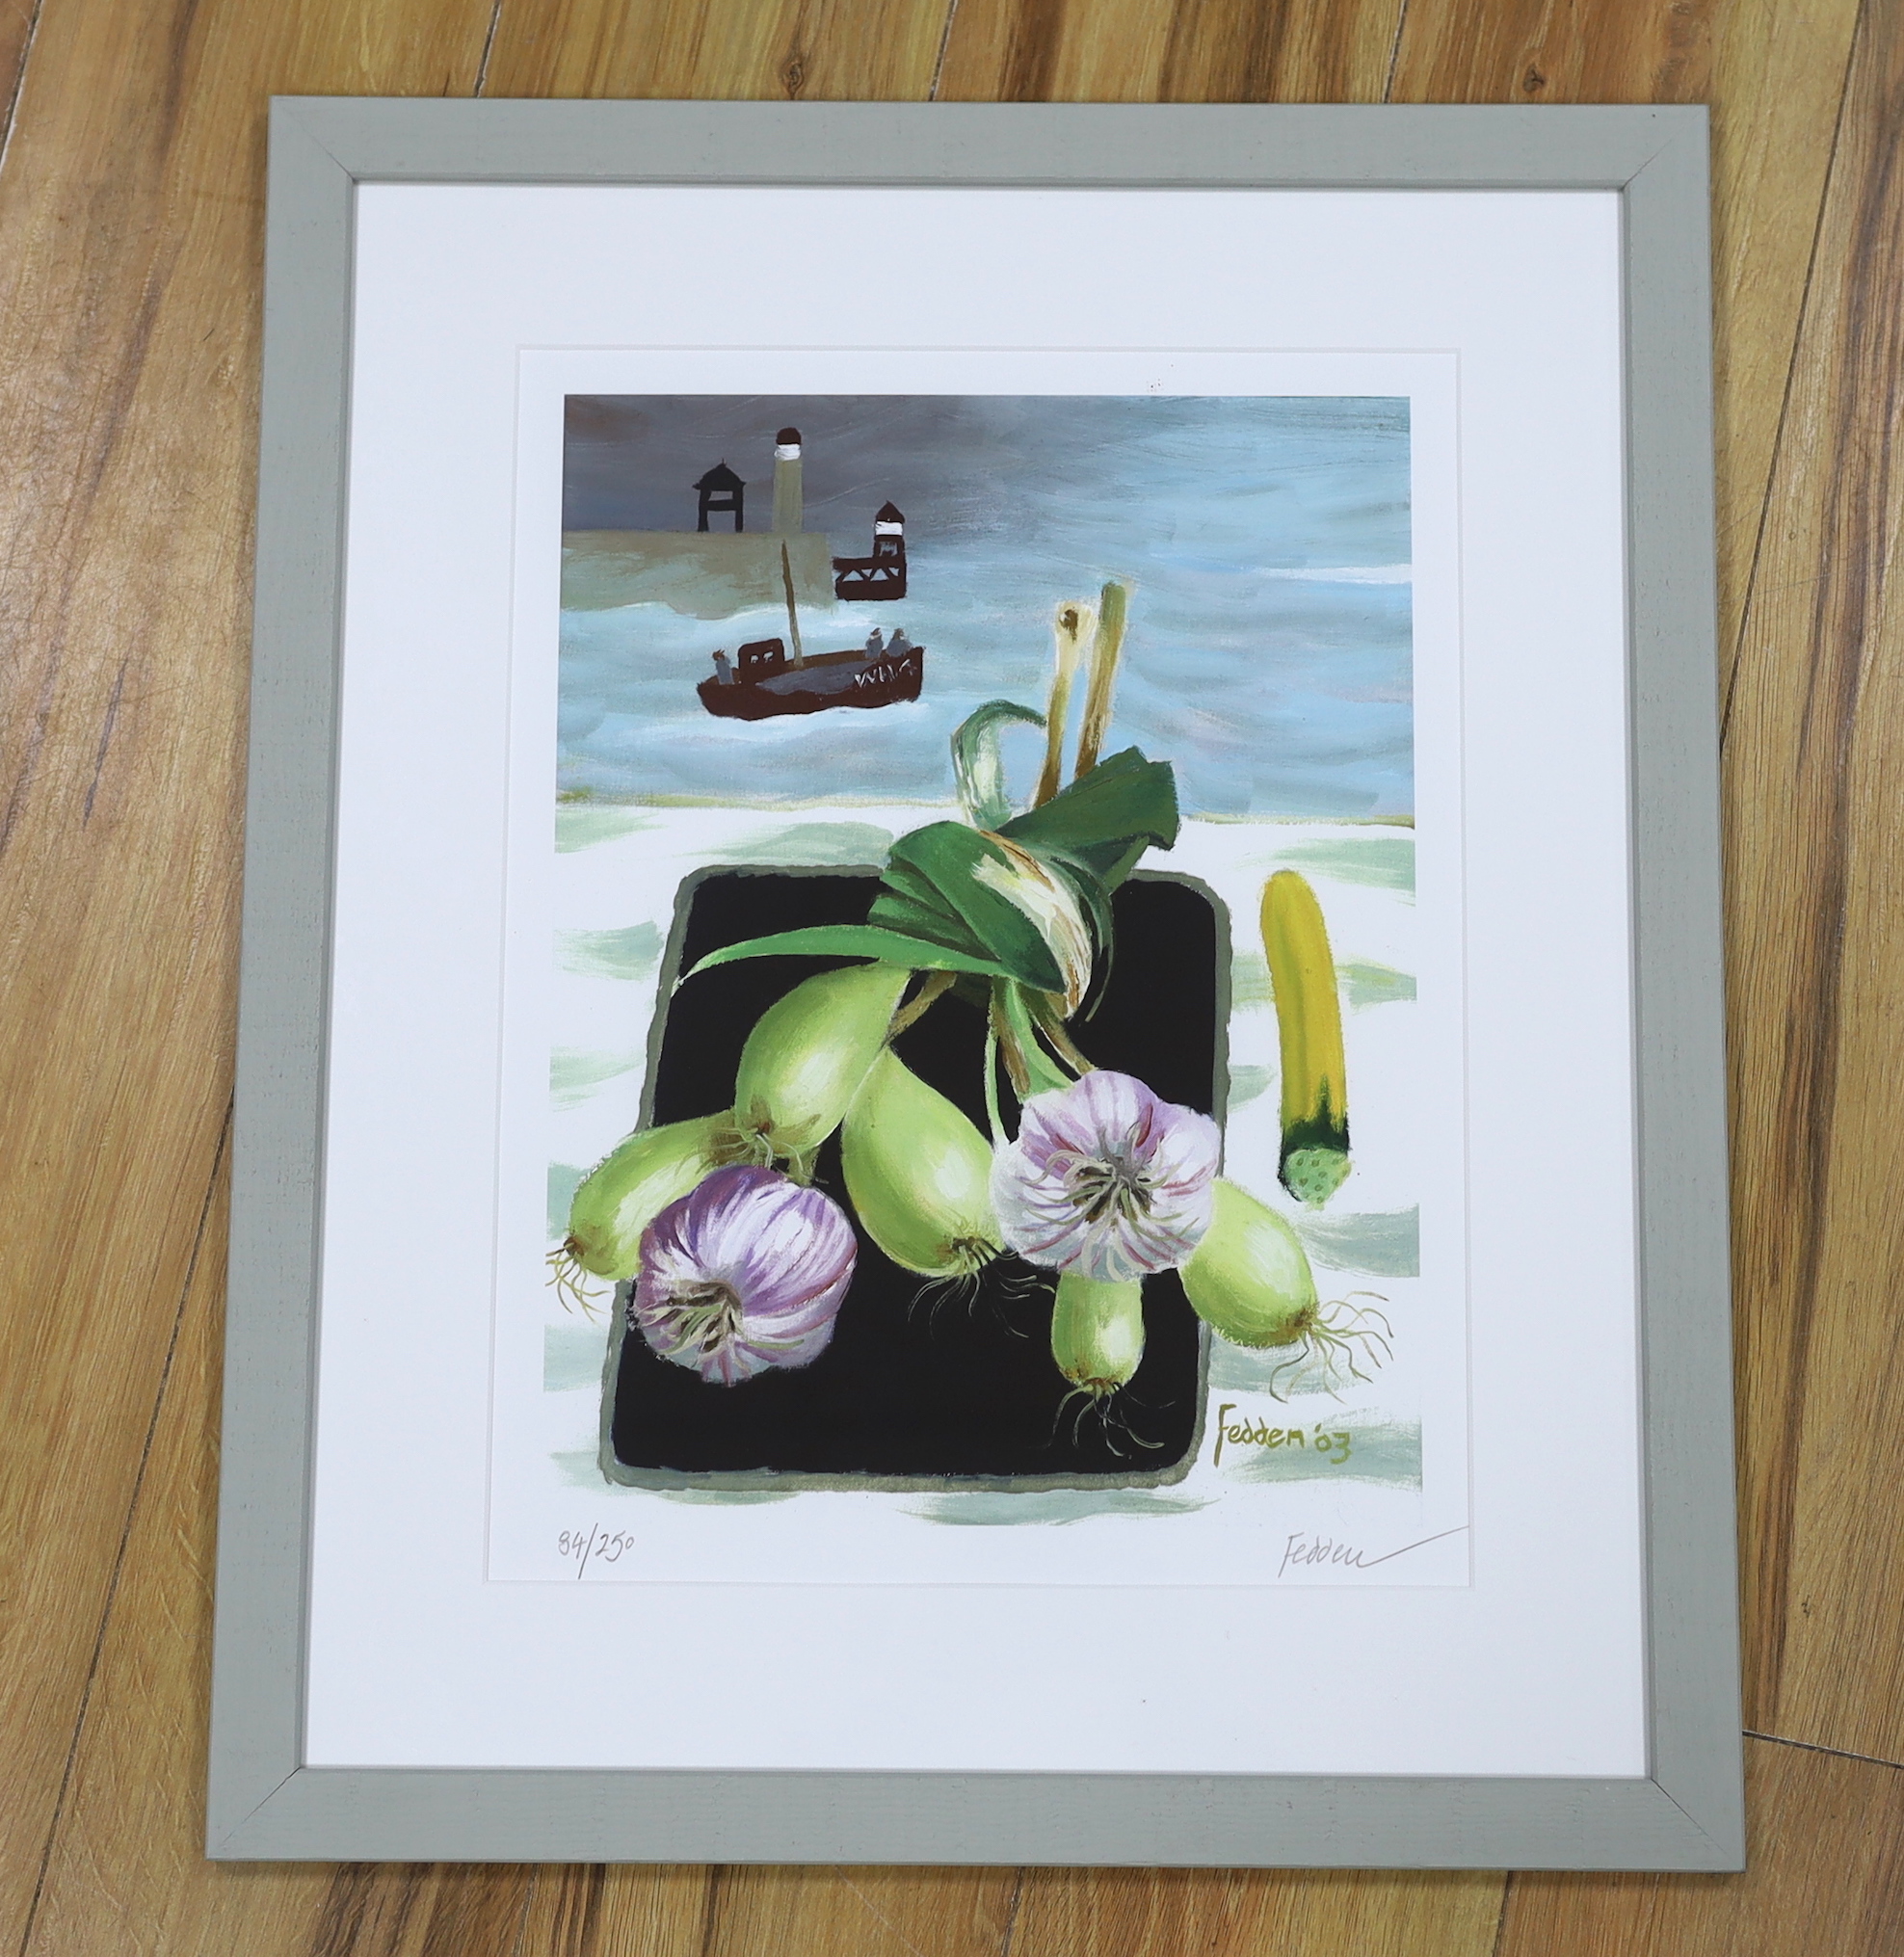 Mary Fedden RA (1915-2012), giclée print, Whitby Harbour, signed in pencil, numbered 84/250, 42 x 32cm